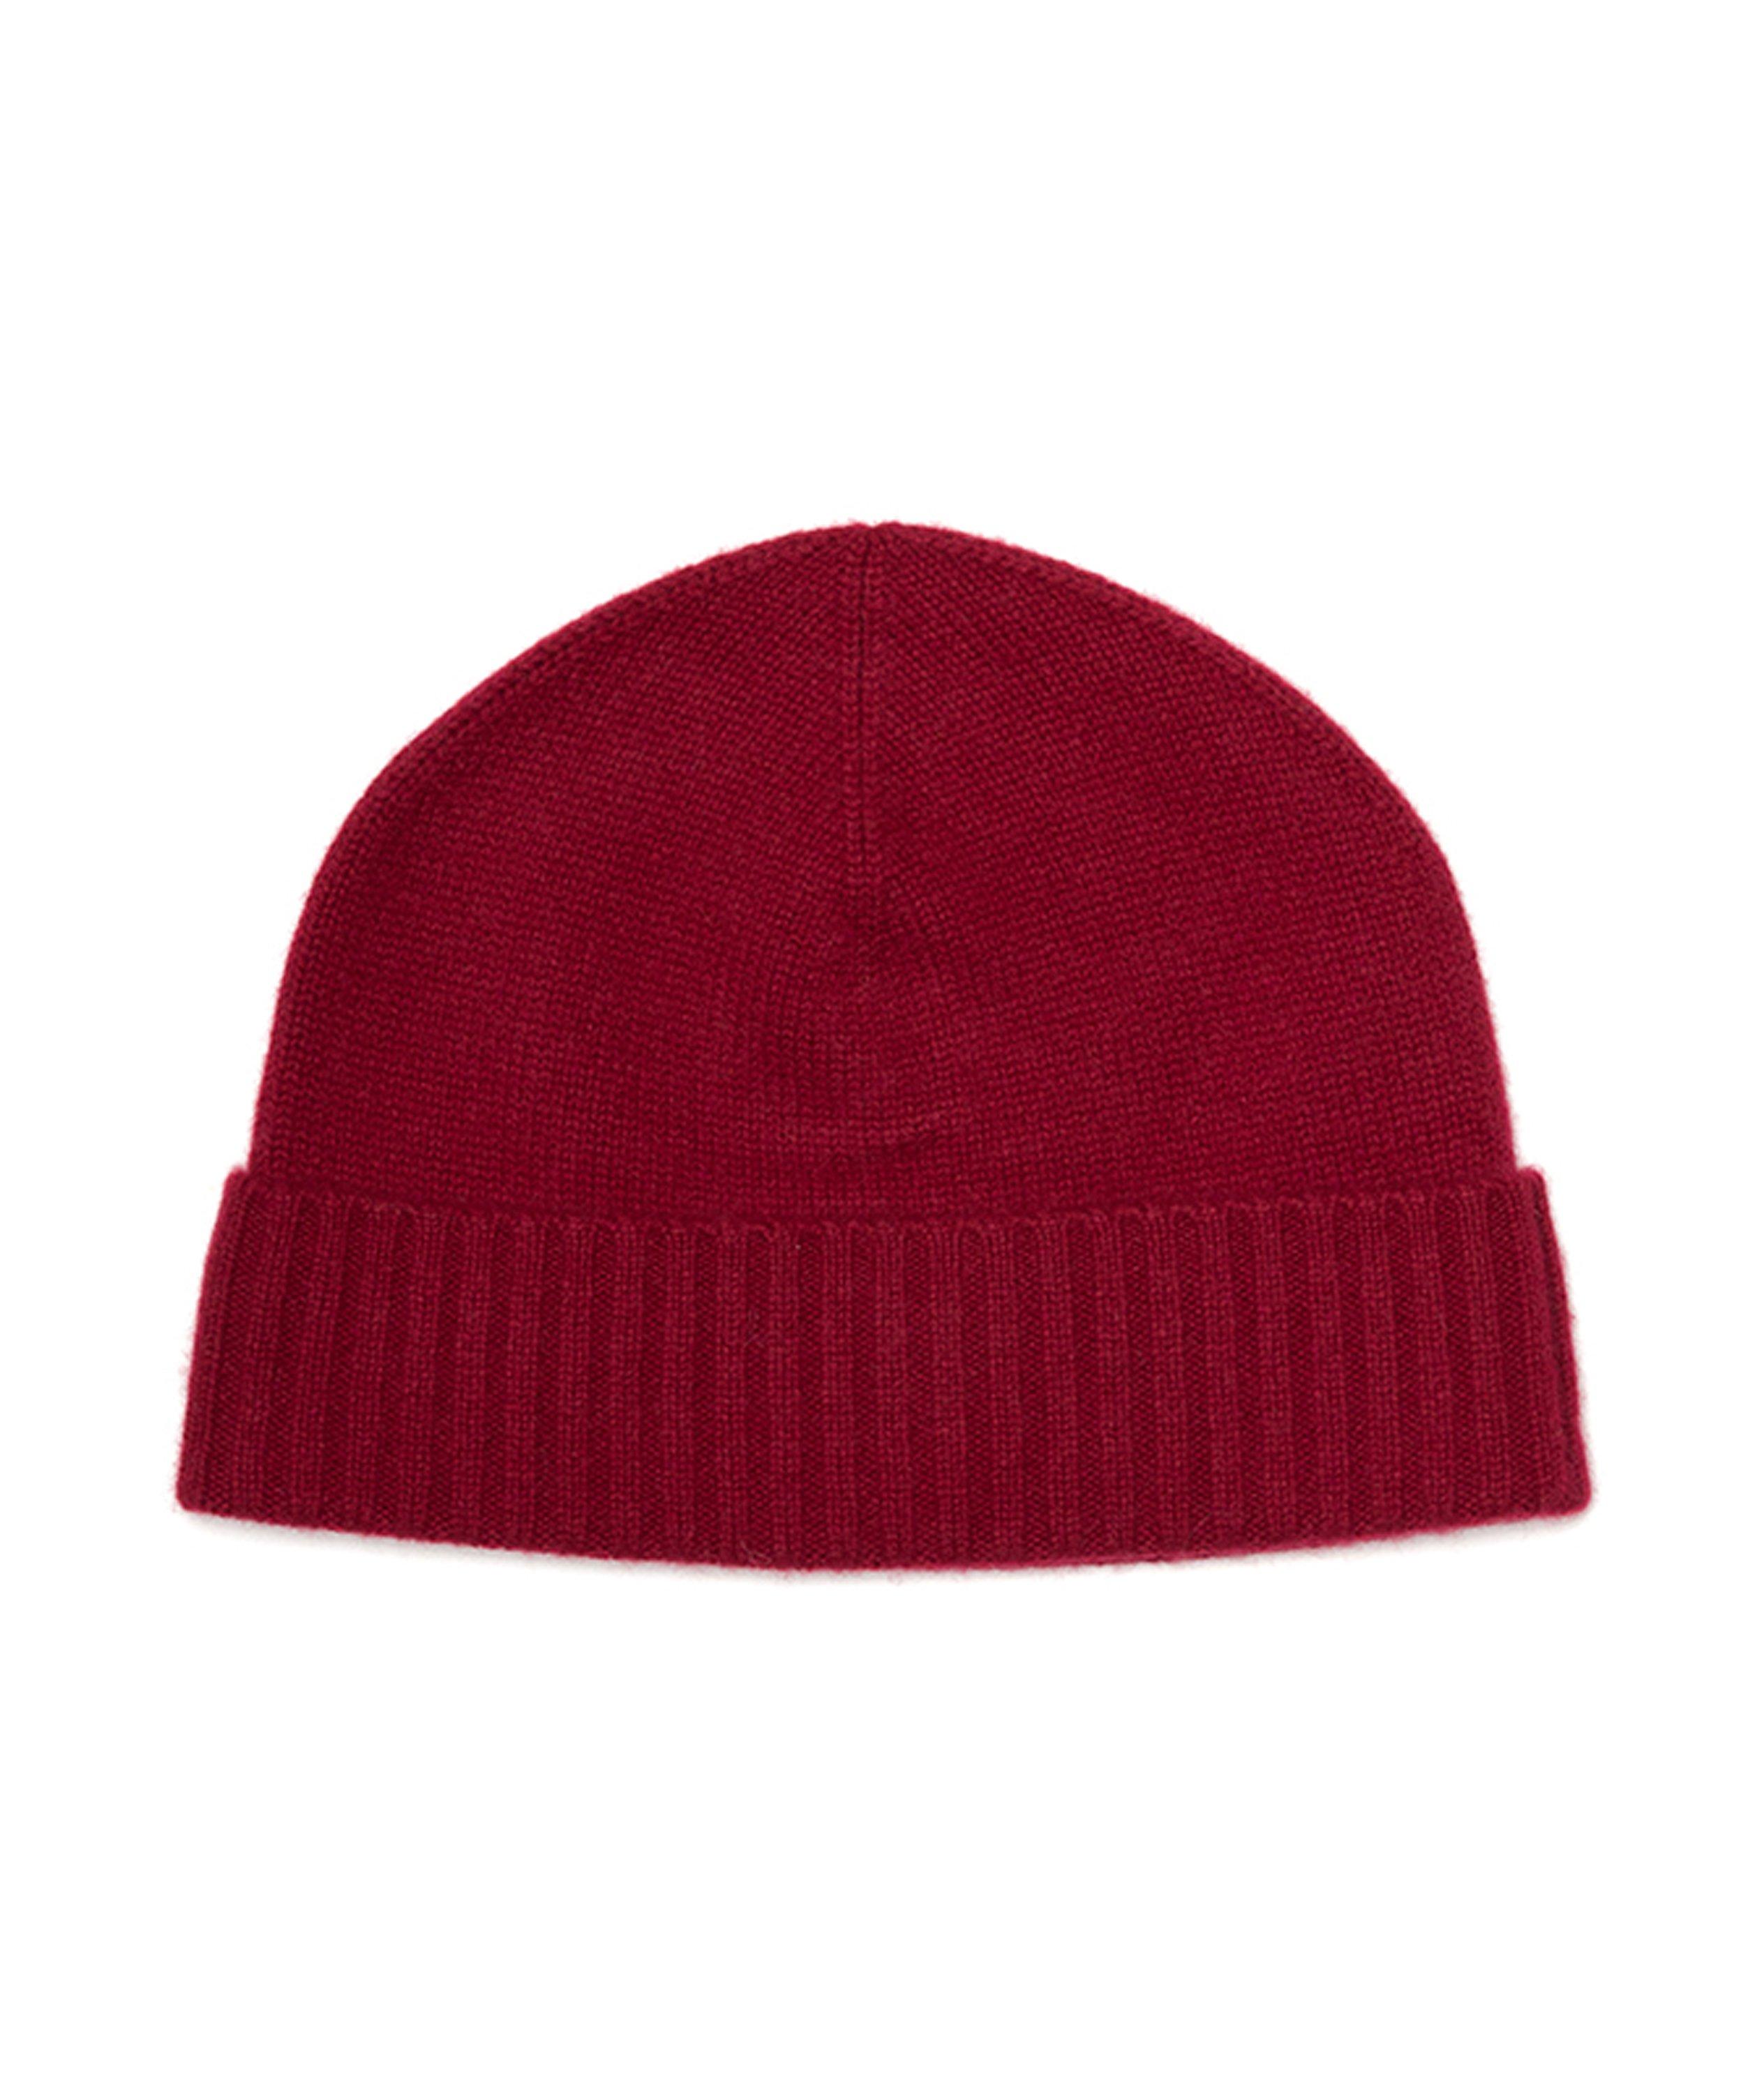 Short Roll Cashmere Beanie image 0